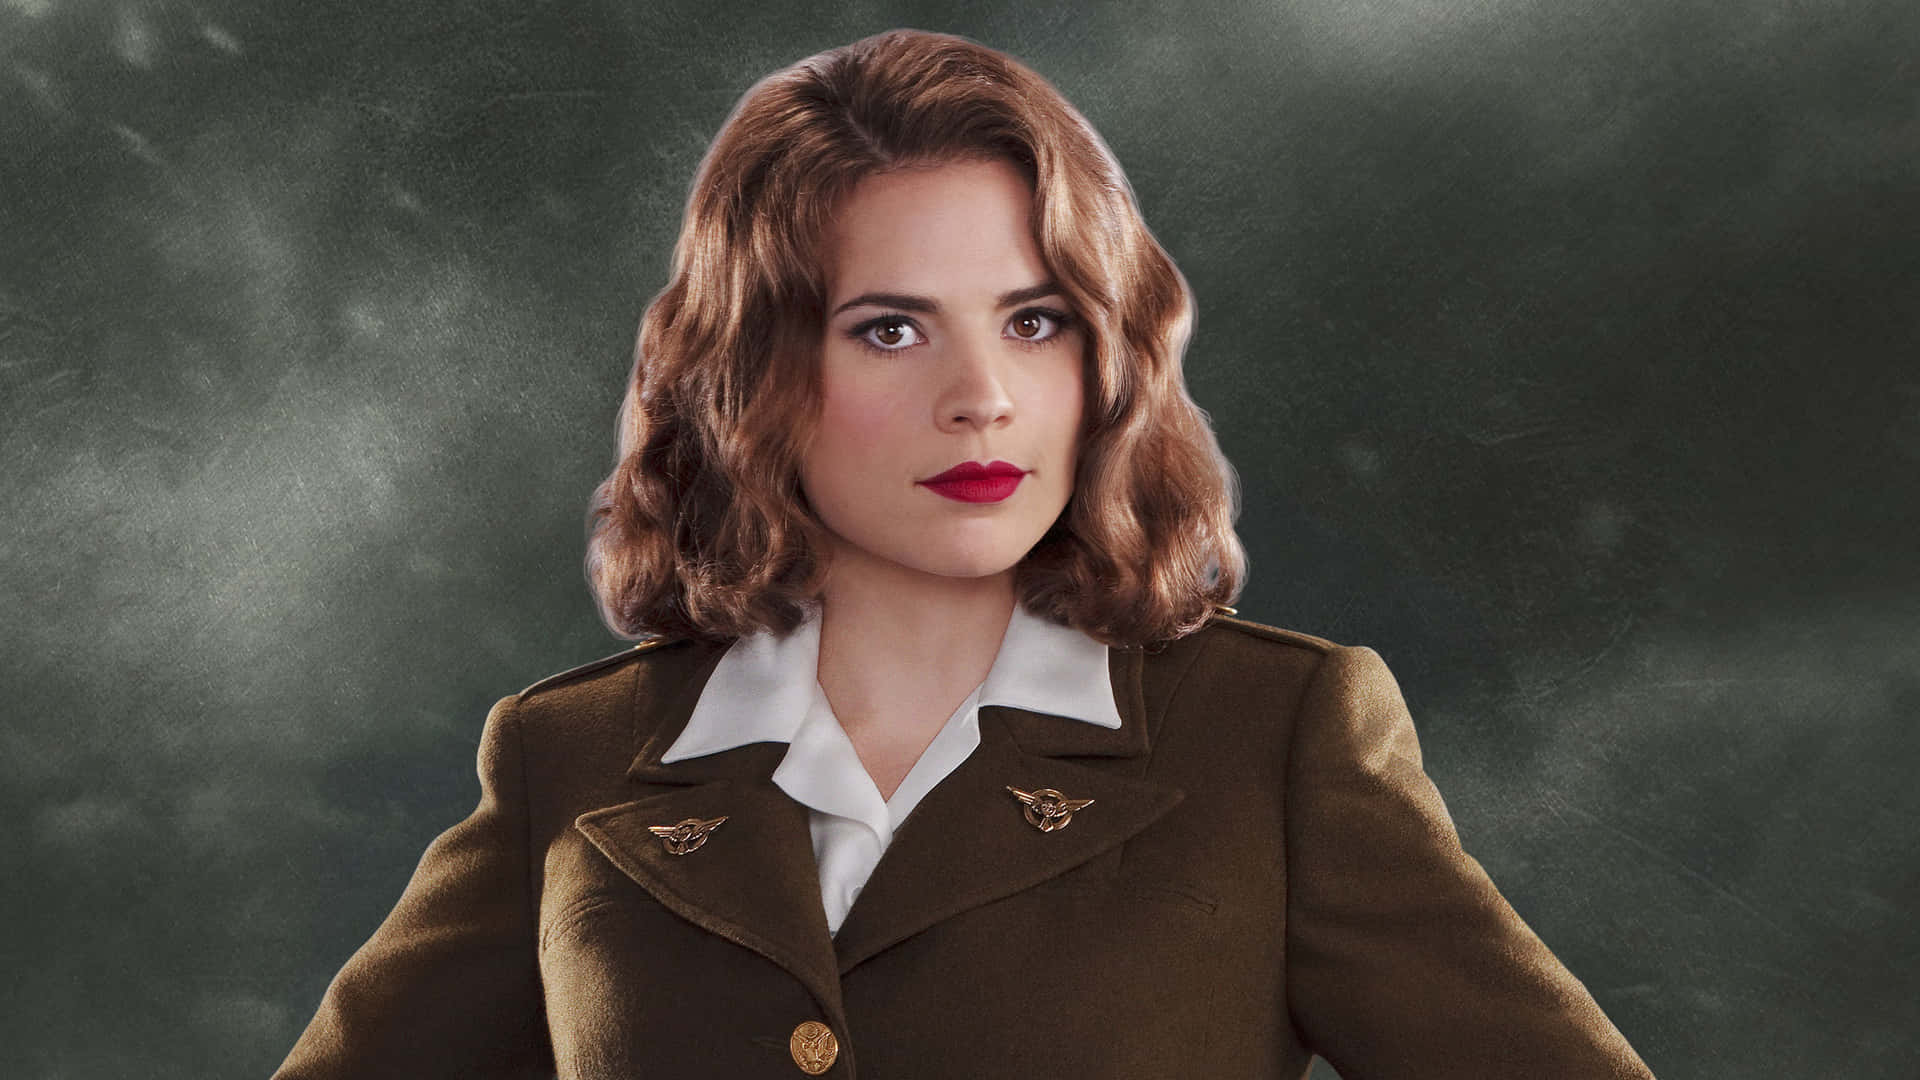 Peggy Carter Fights For Justice Wallpaper